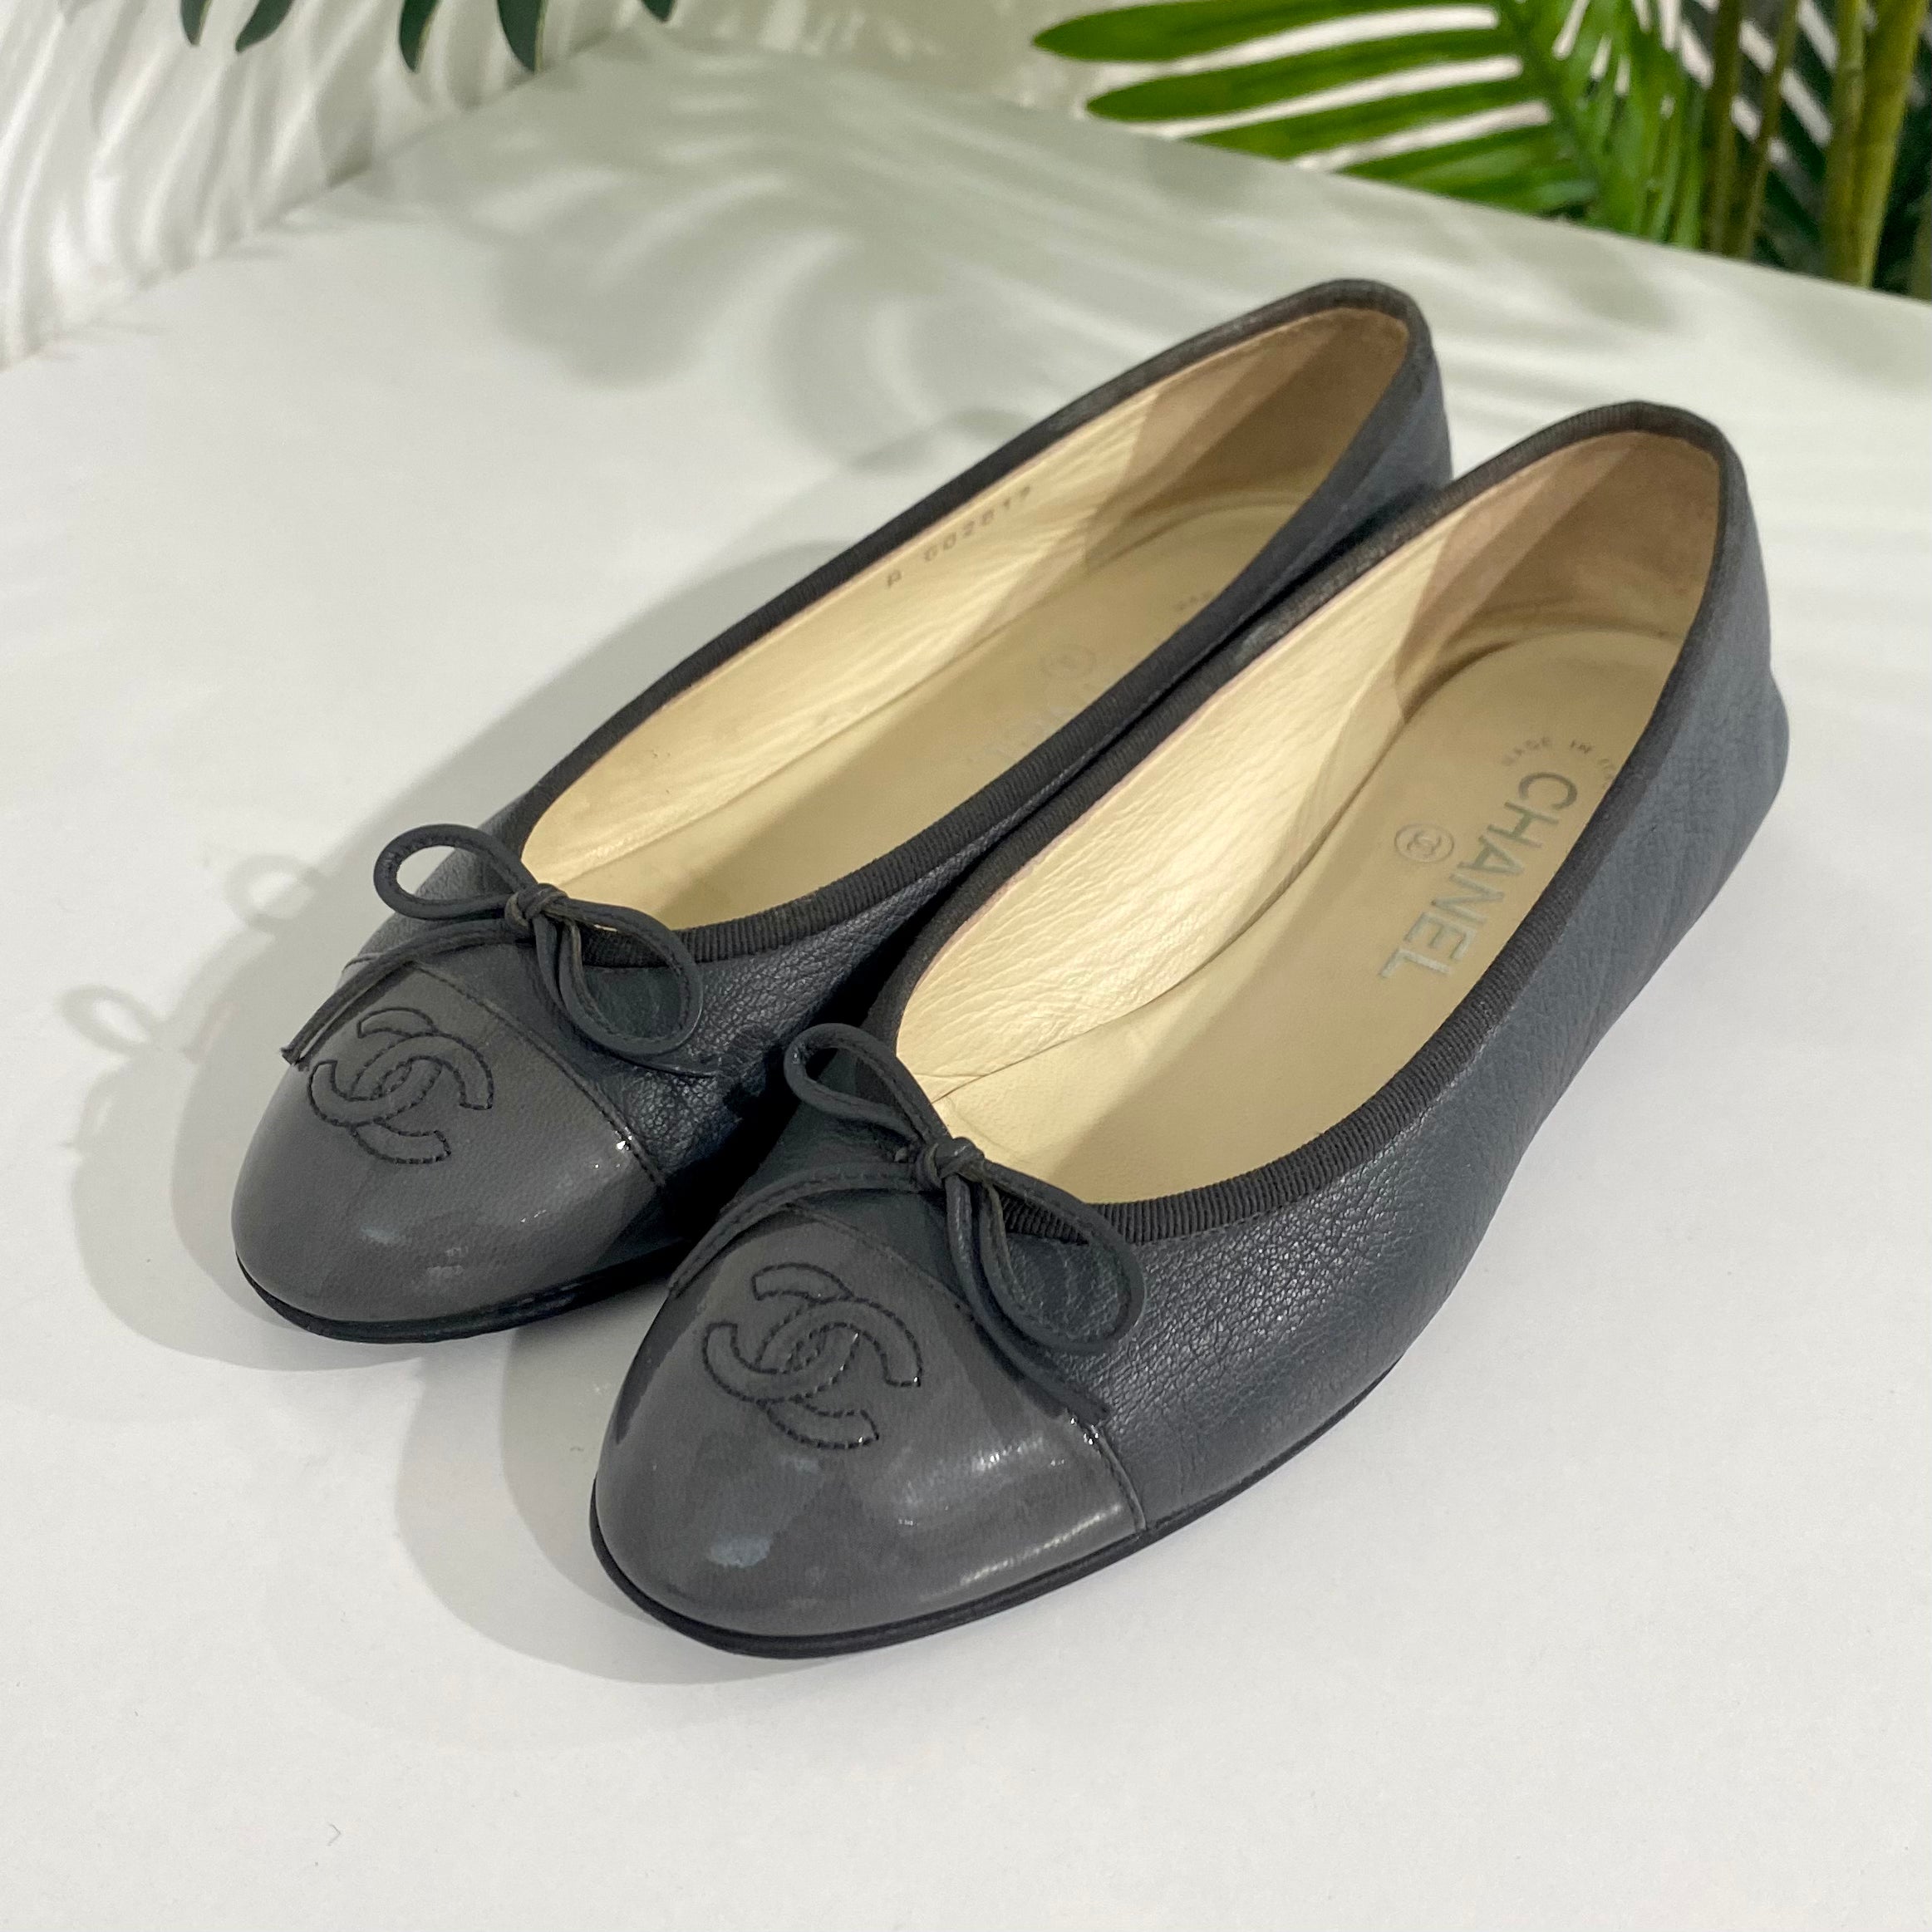 CHANEL, Shoes, Chanel Ballet Flats Size 4